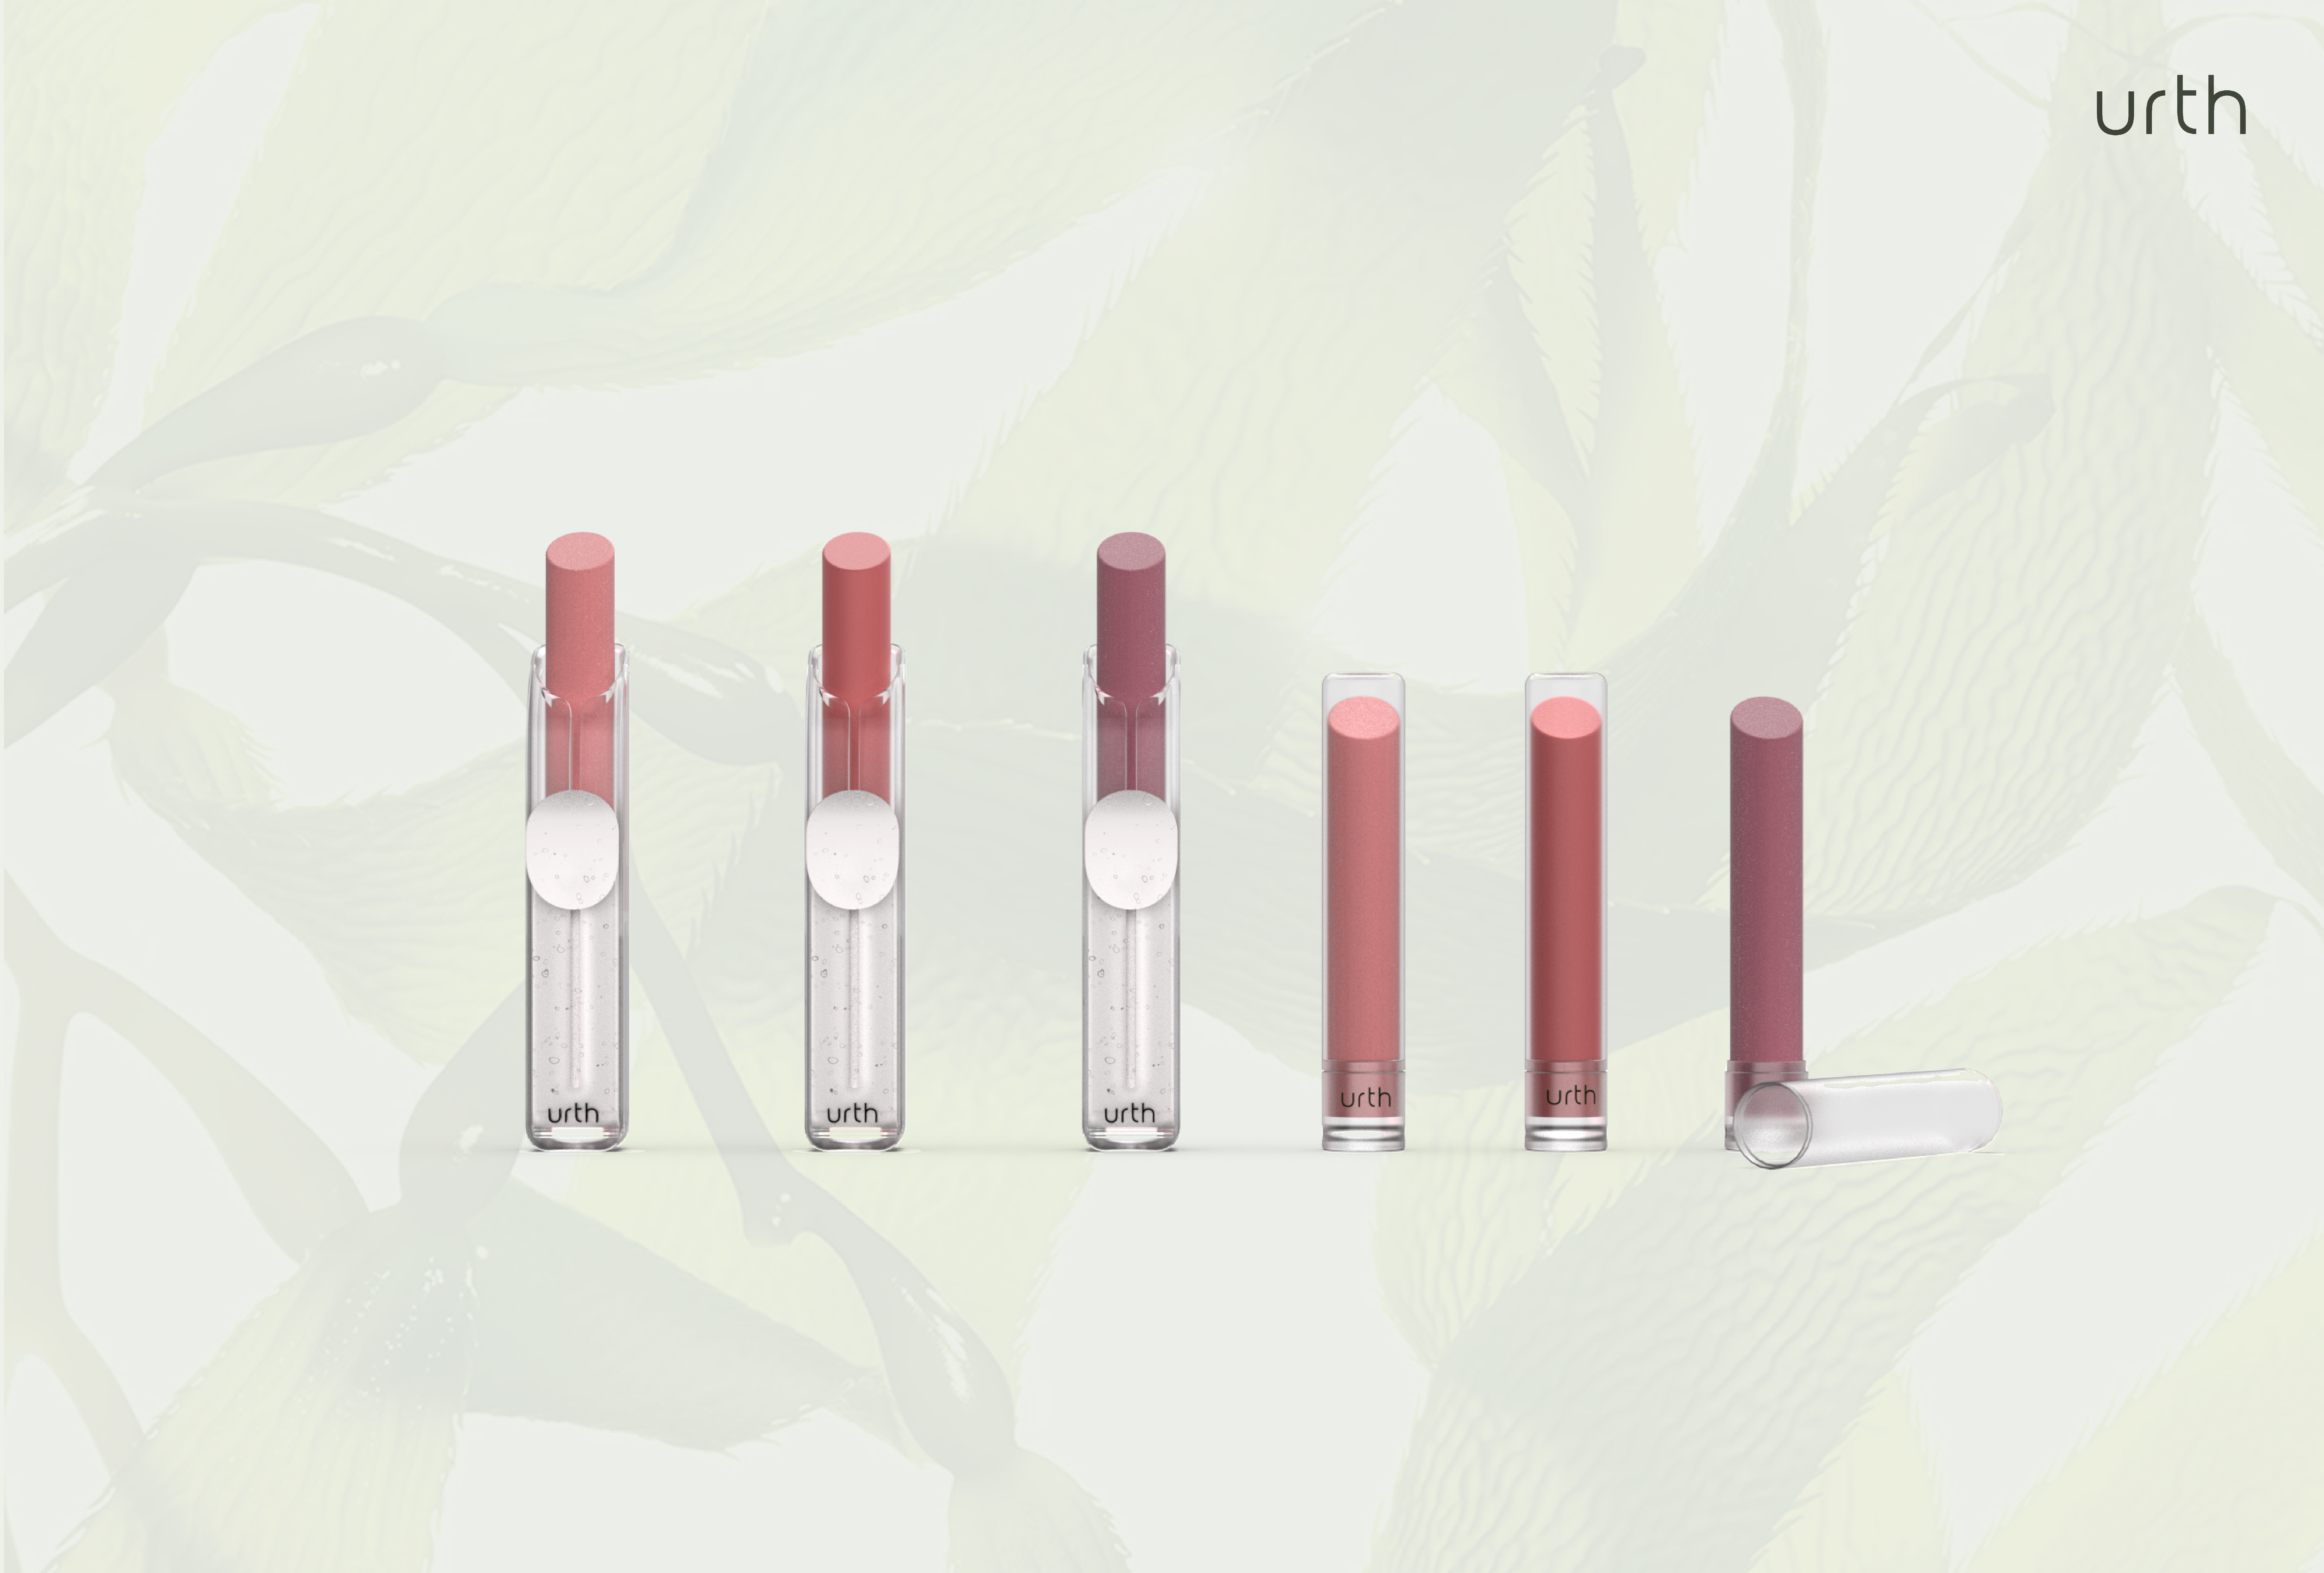 Urth, a refillable lipstick using algae that biodegrades at its end-of-life